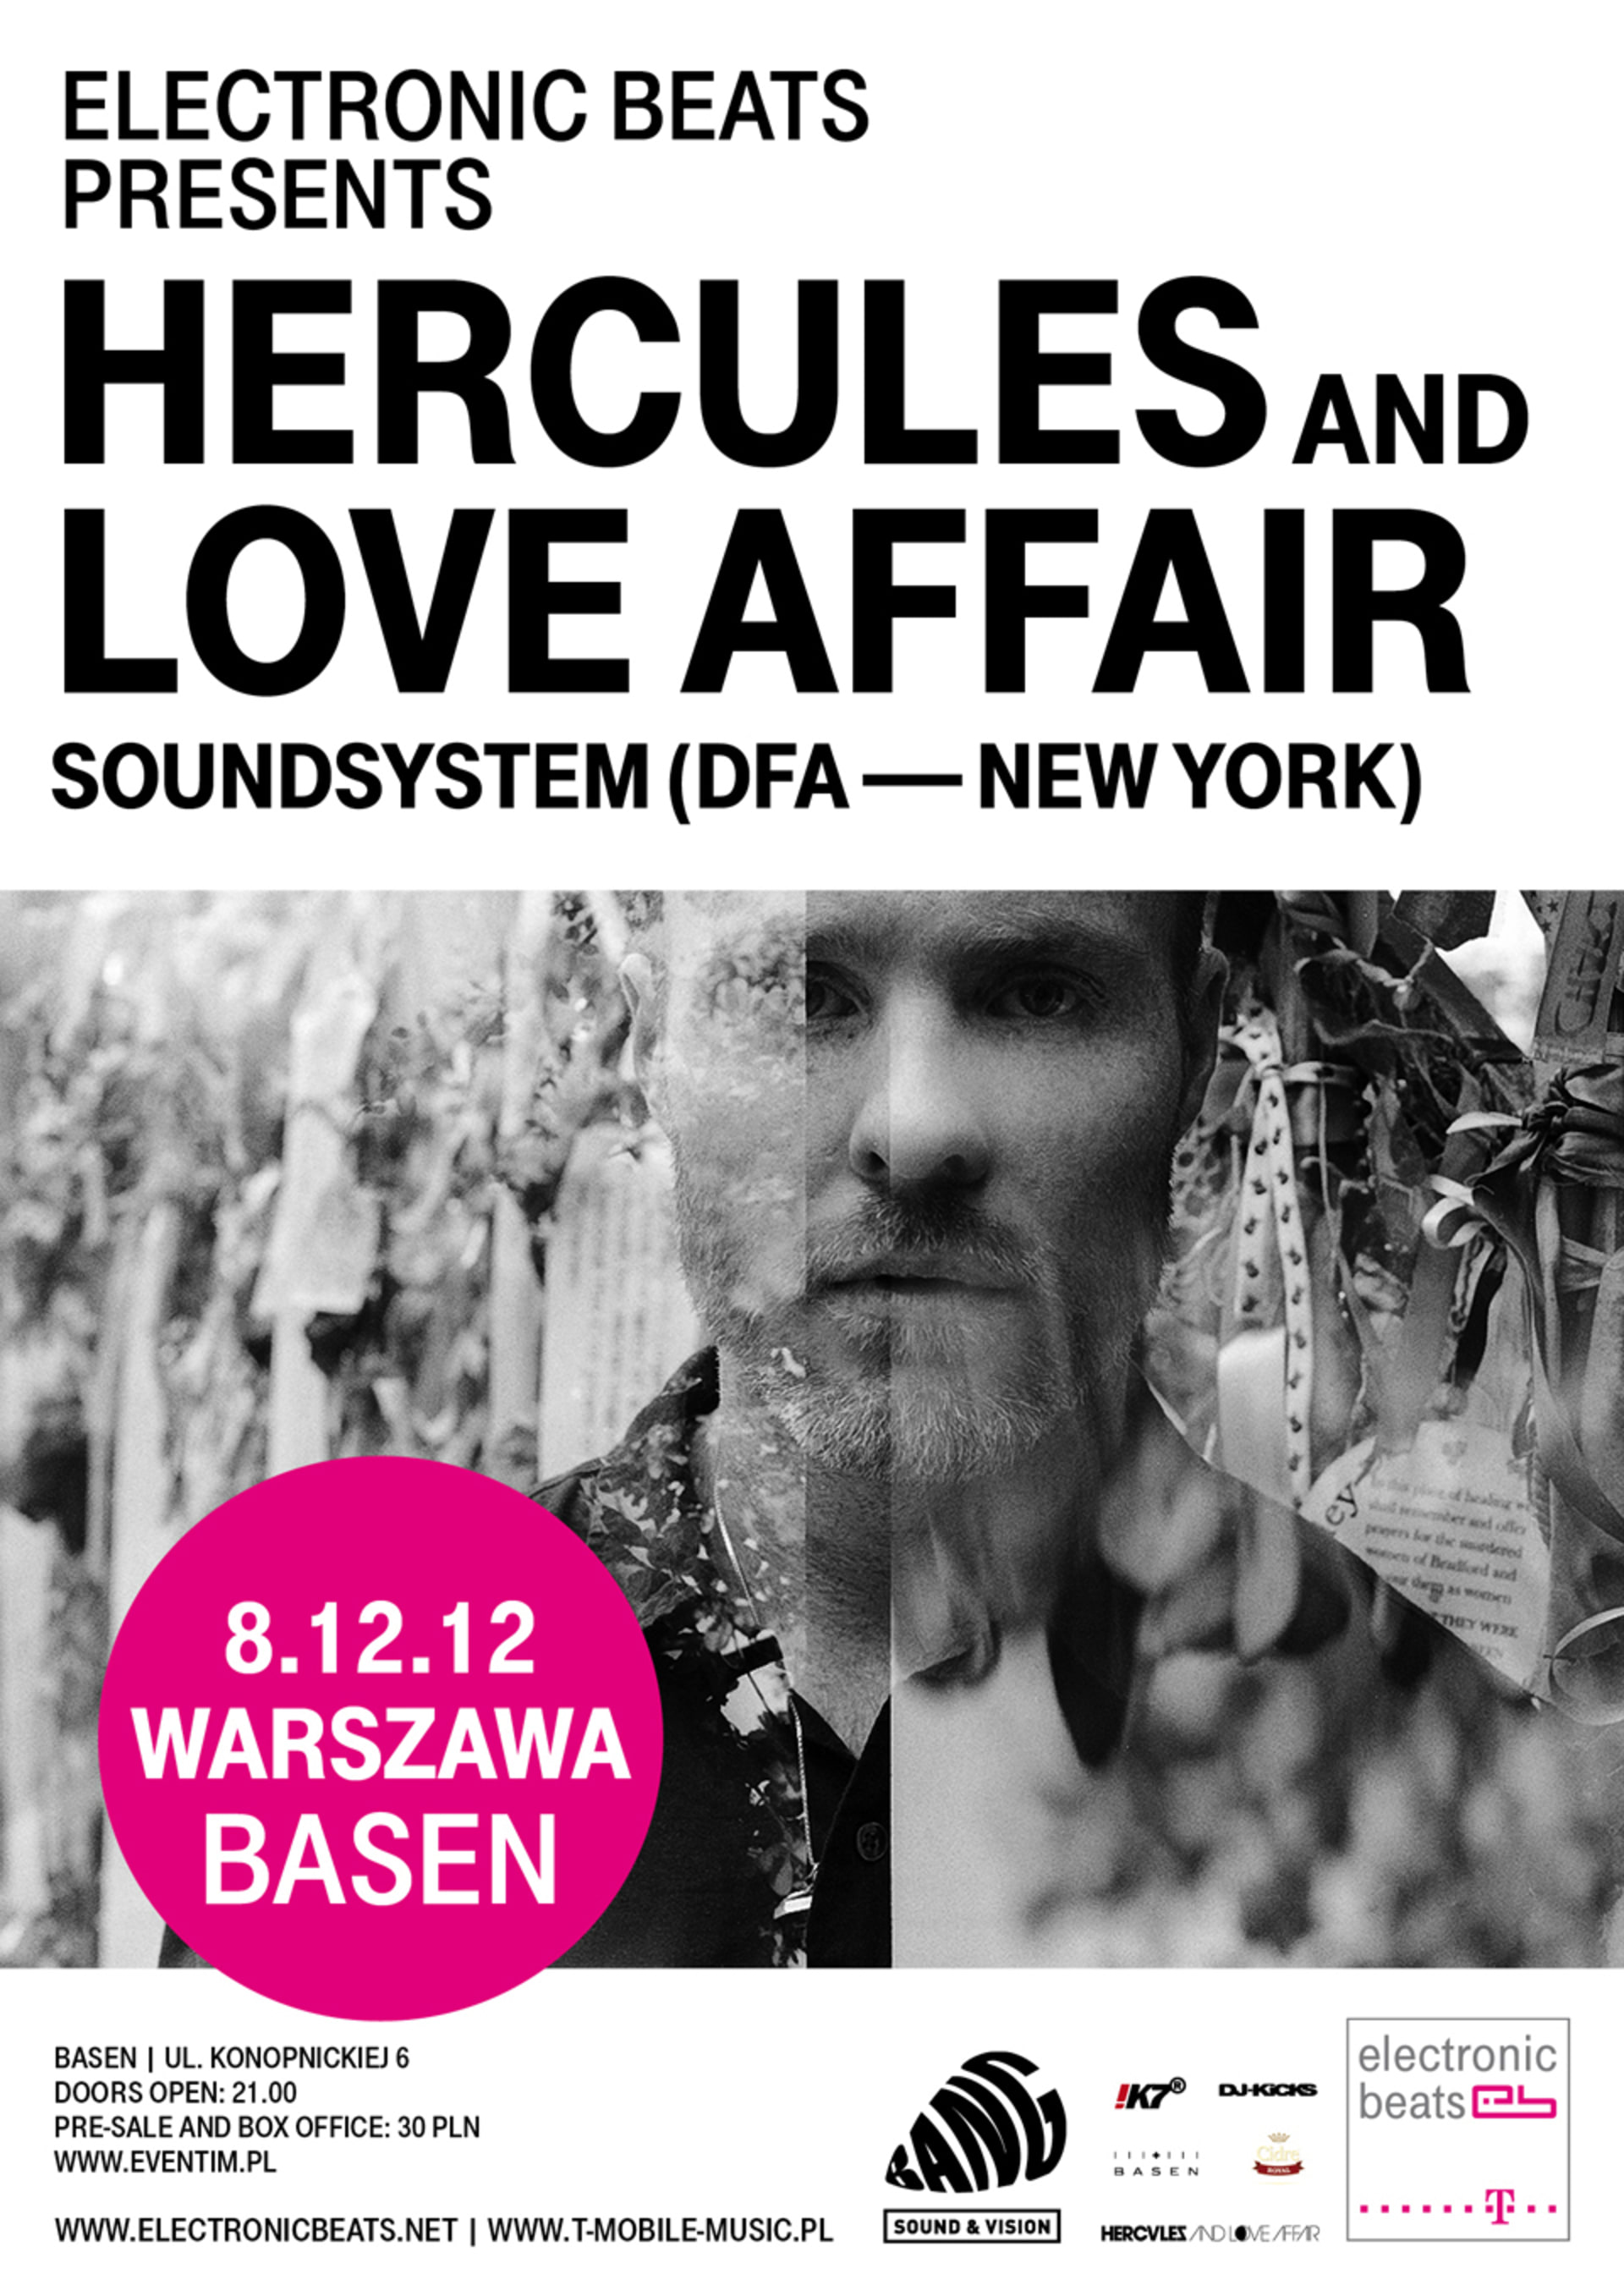 Electronic Beats presents Hercules And Love Affair in Warsaw